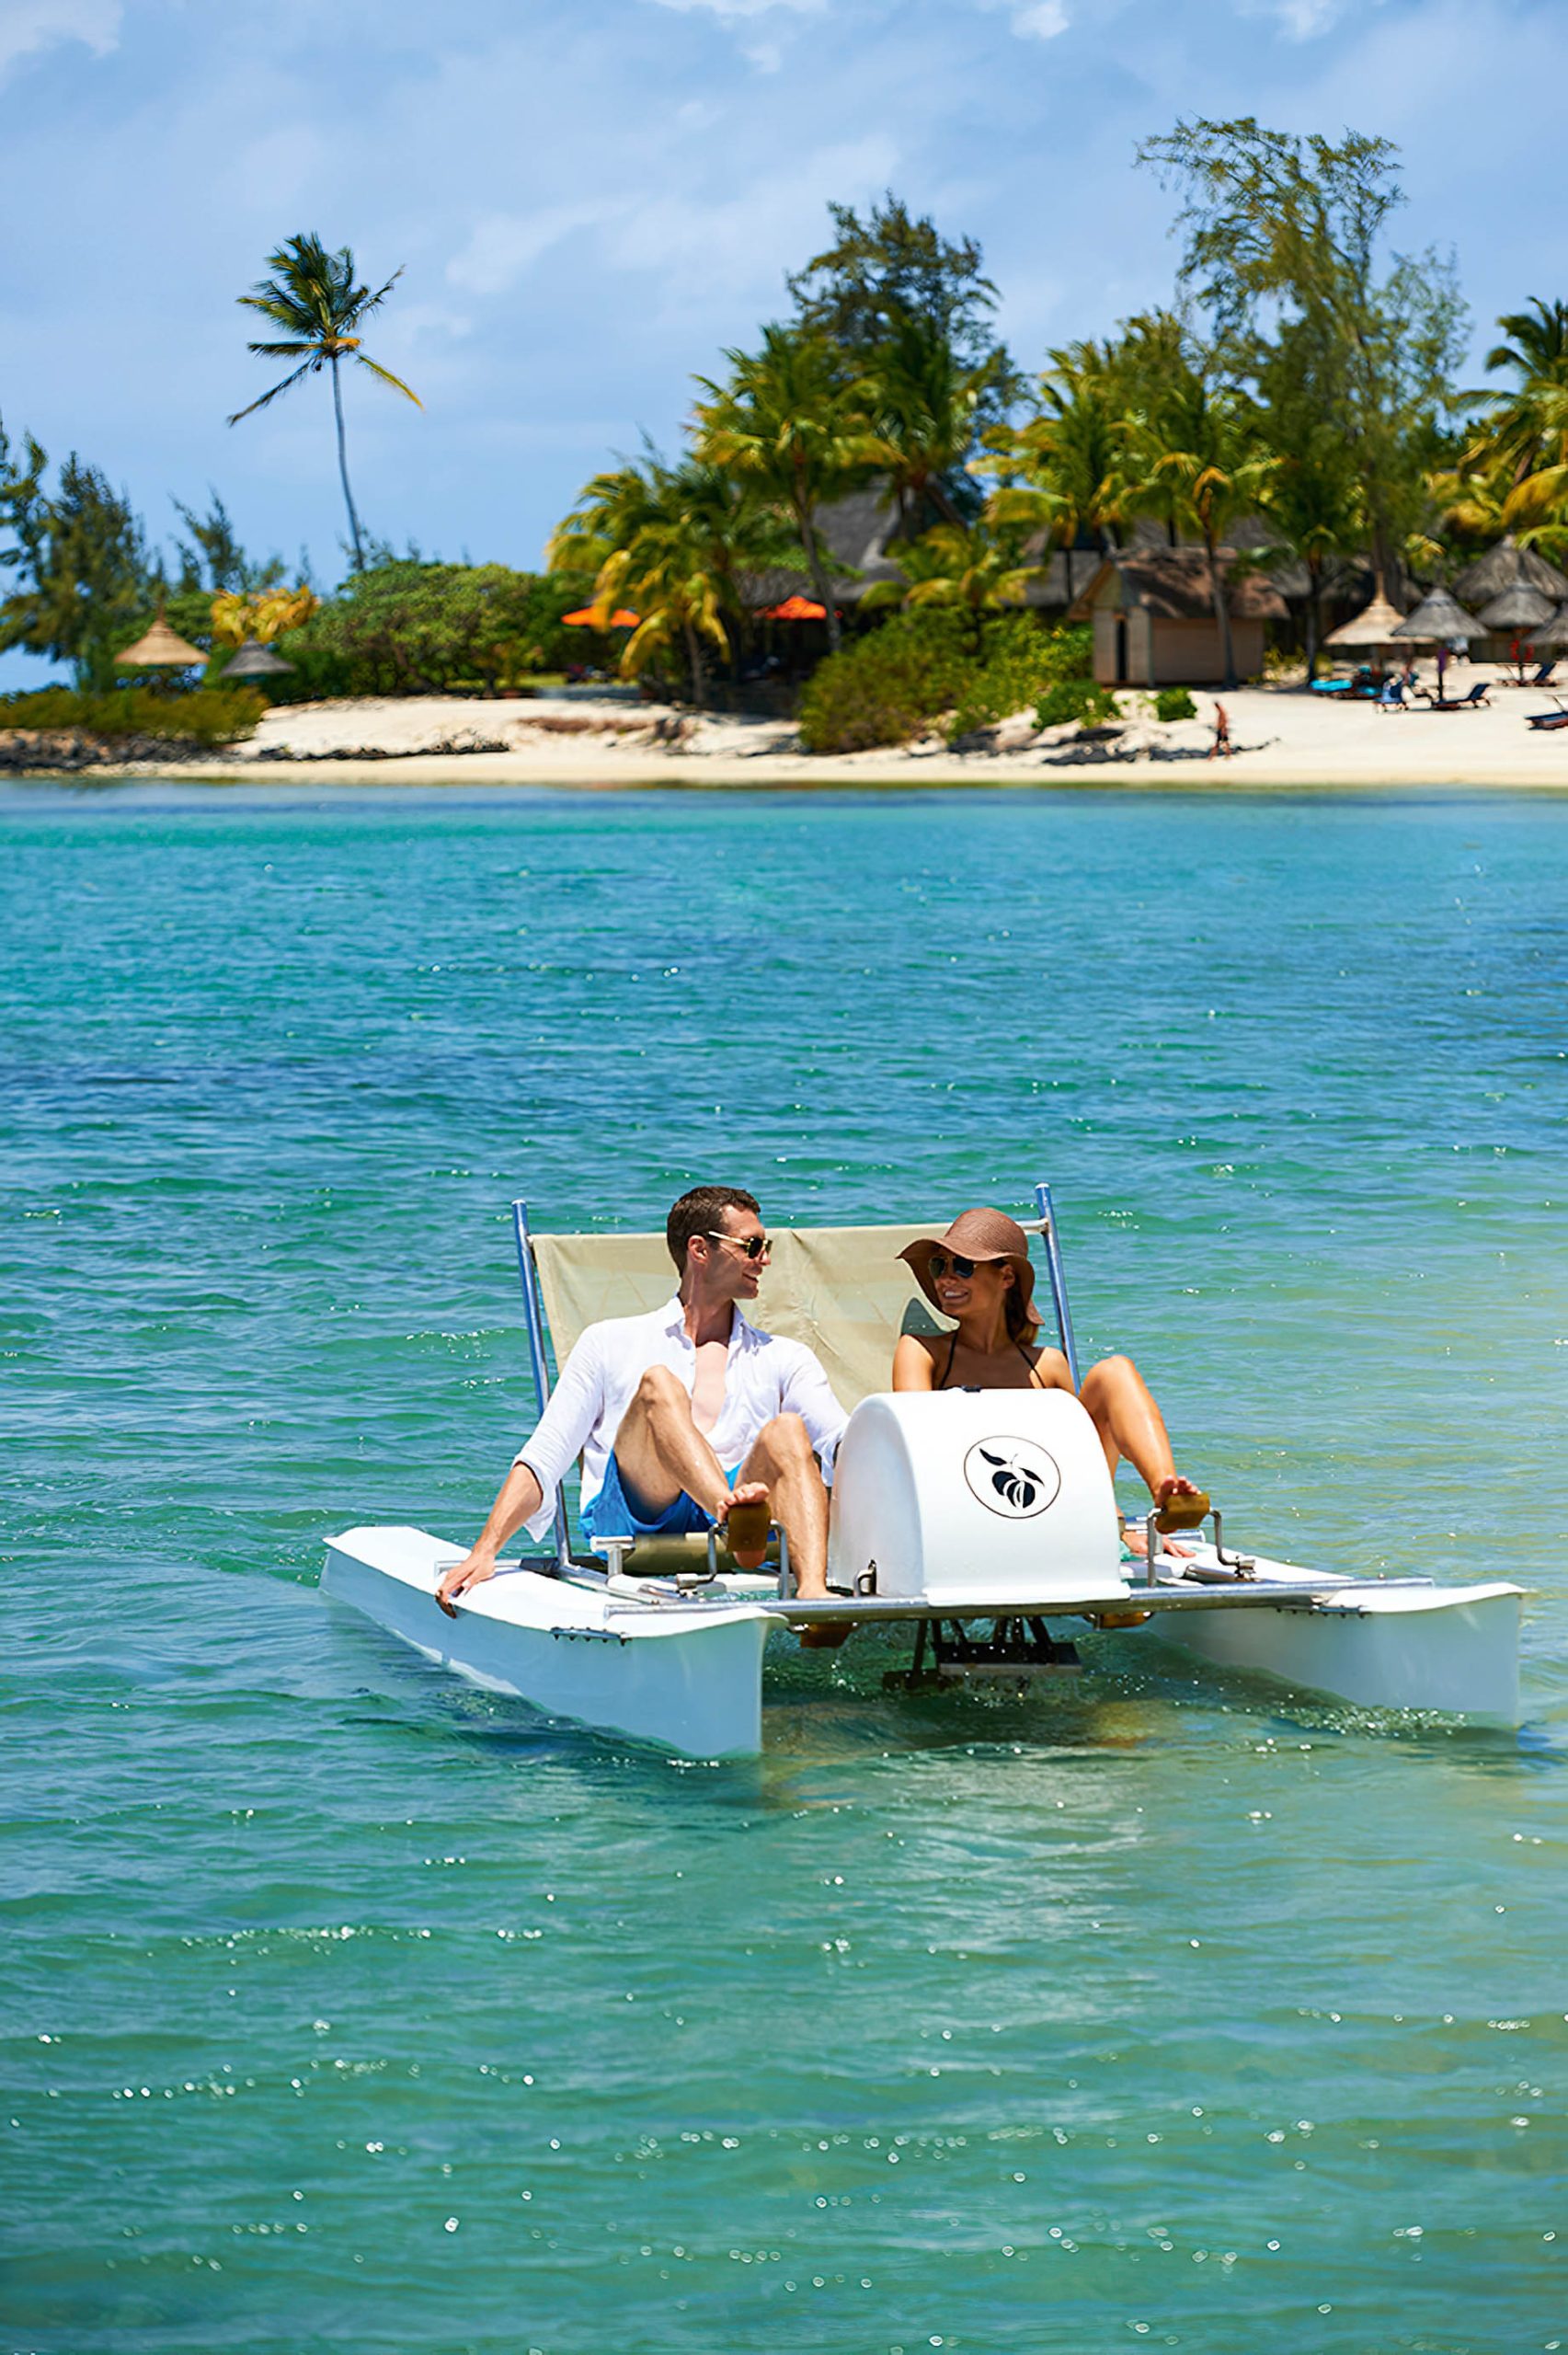 Constance Prince Maurice Resort – Mauritius – Peddle Boat